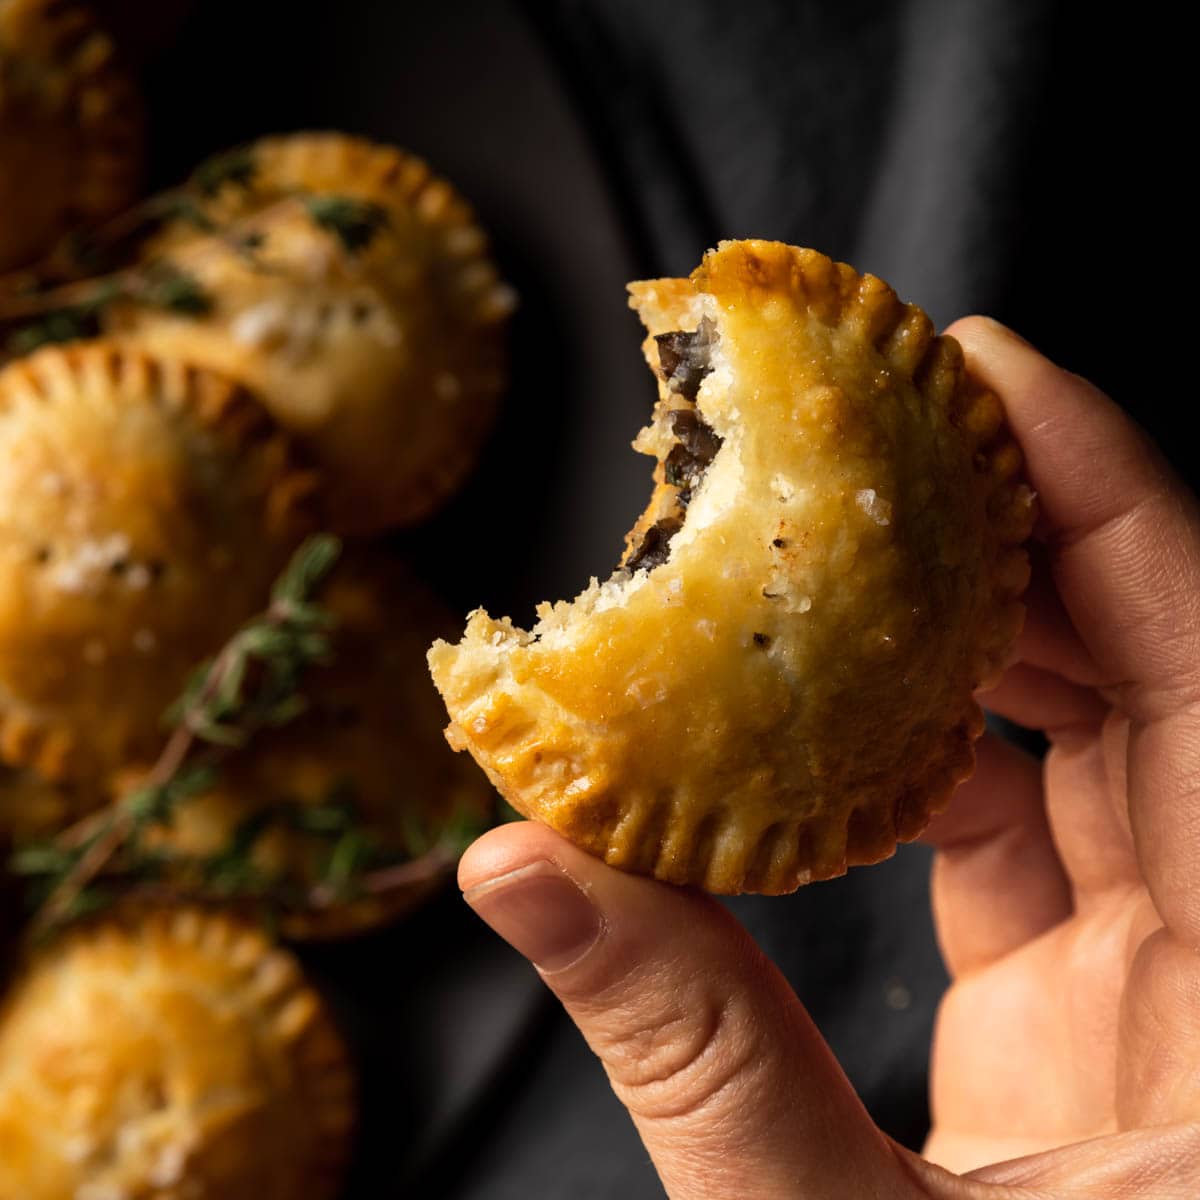 A close up of a hand holding a mini mushroom pie with a bite taken out of it.